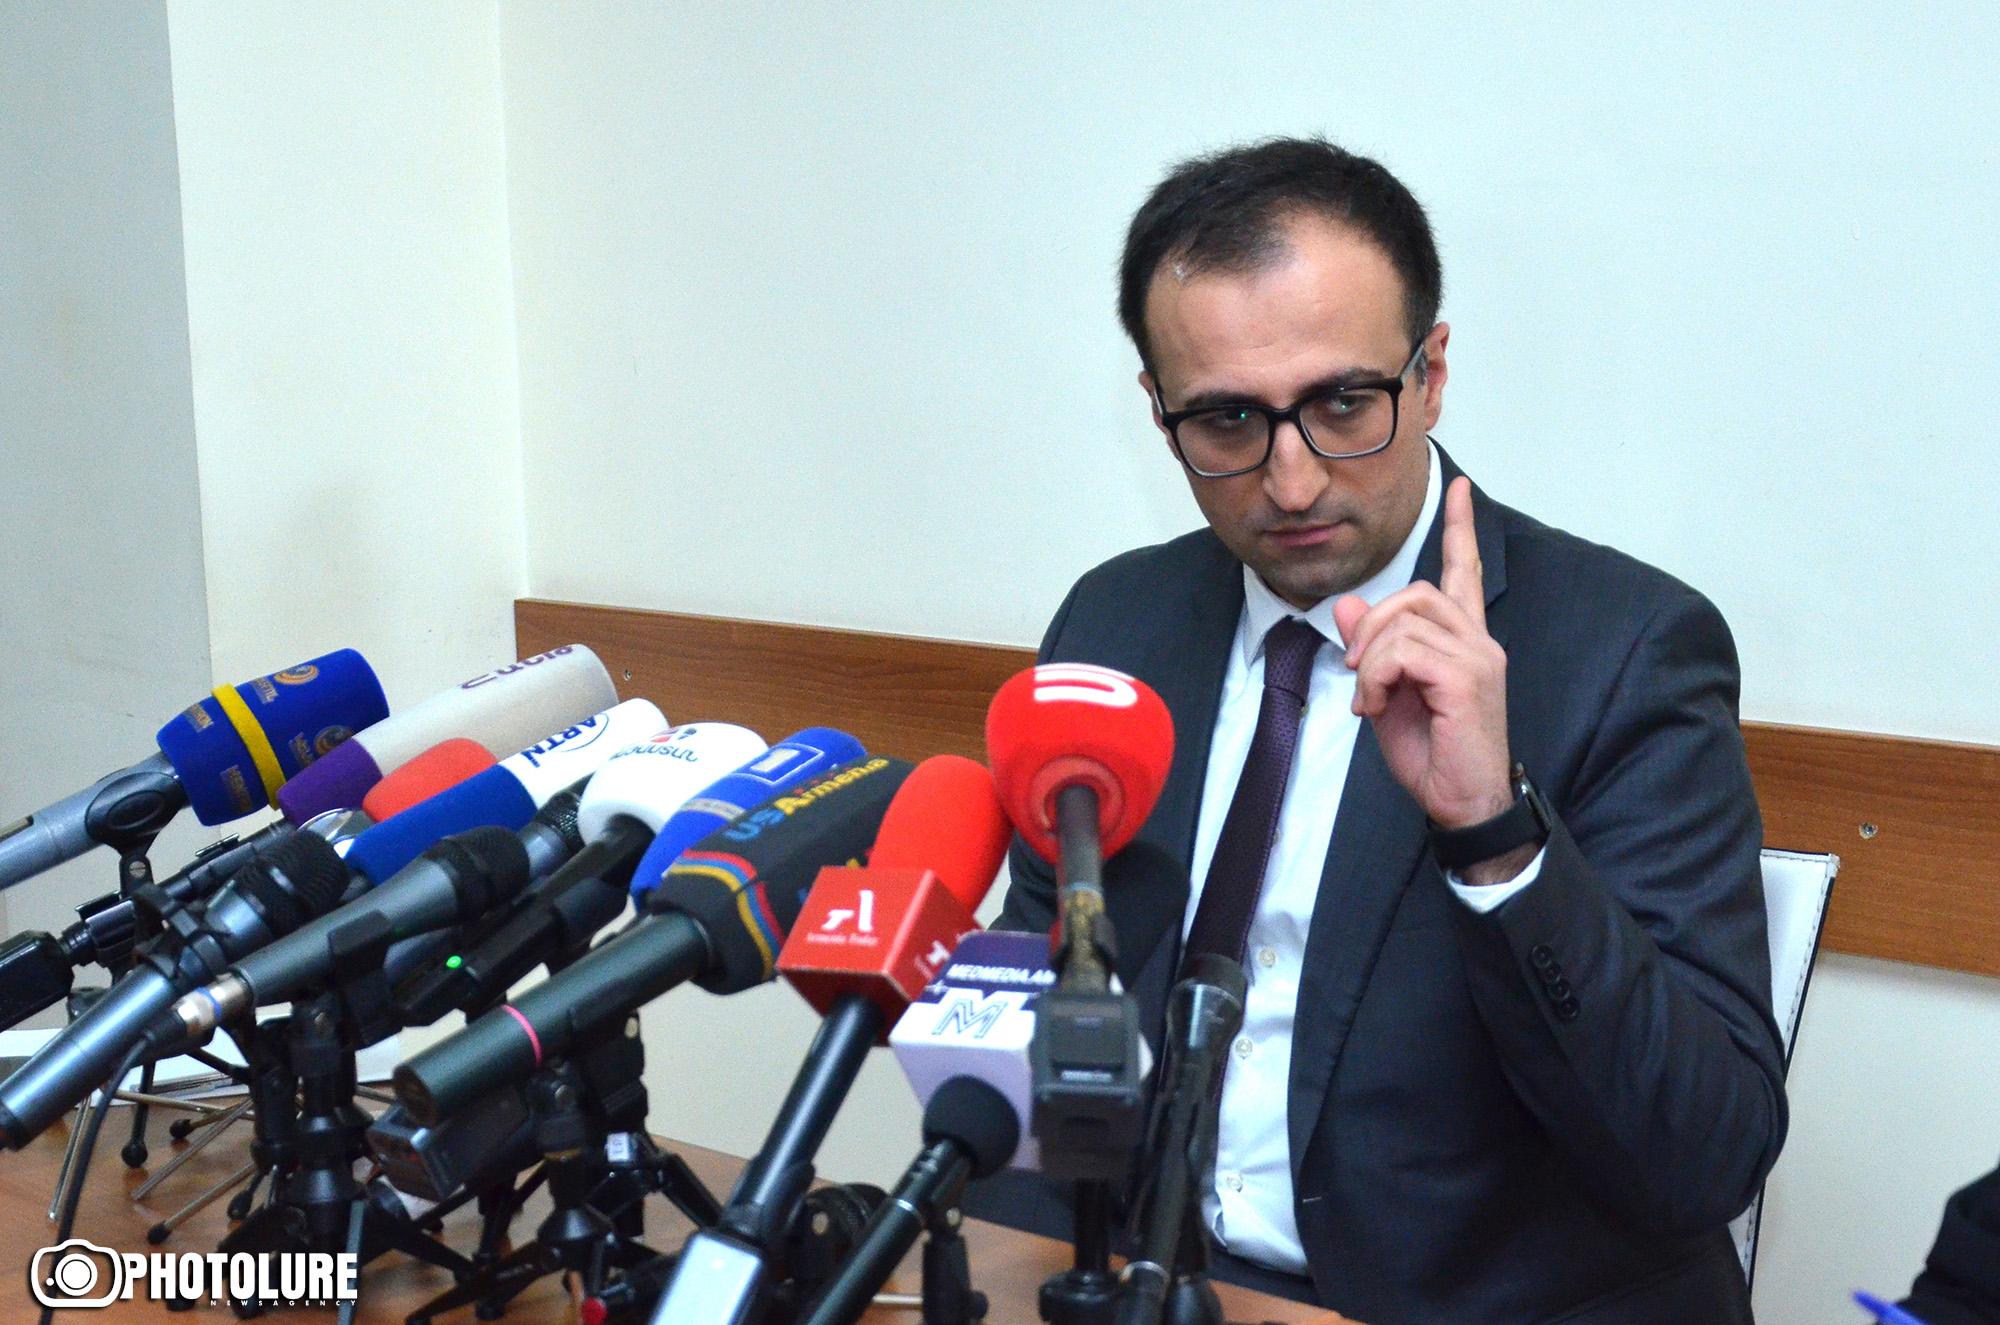 According to Arsen Torosyan, anti-epidemic measures are being implemented in Armenia, which comply with international standards. 